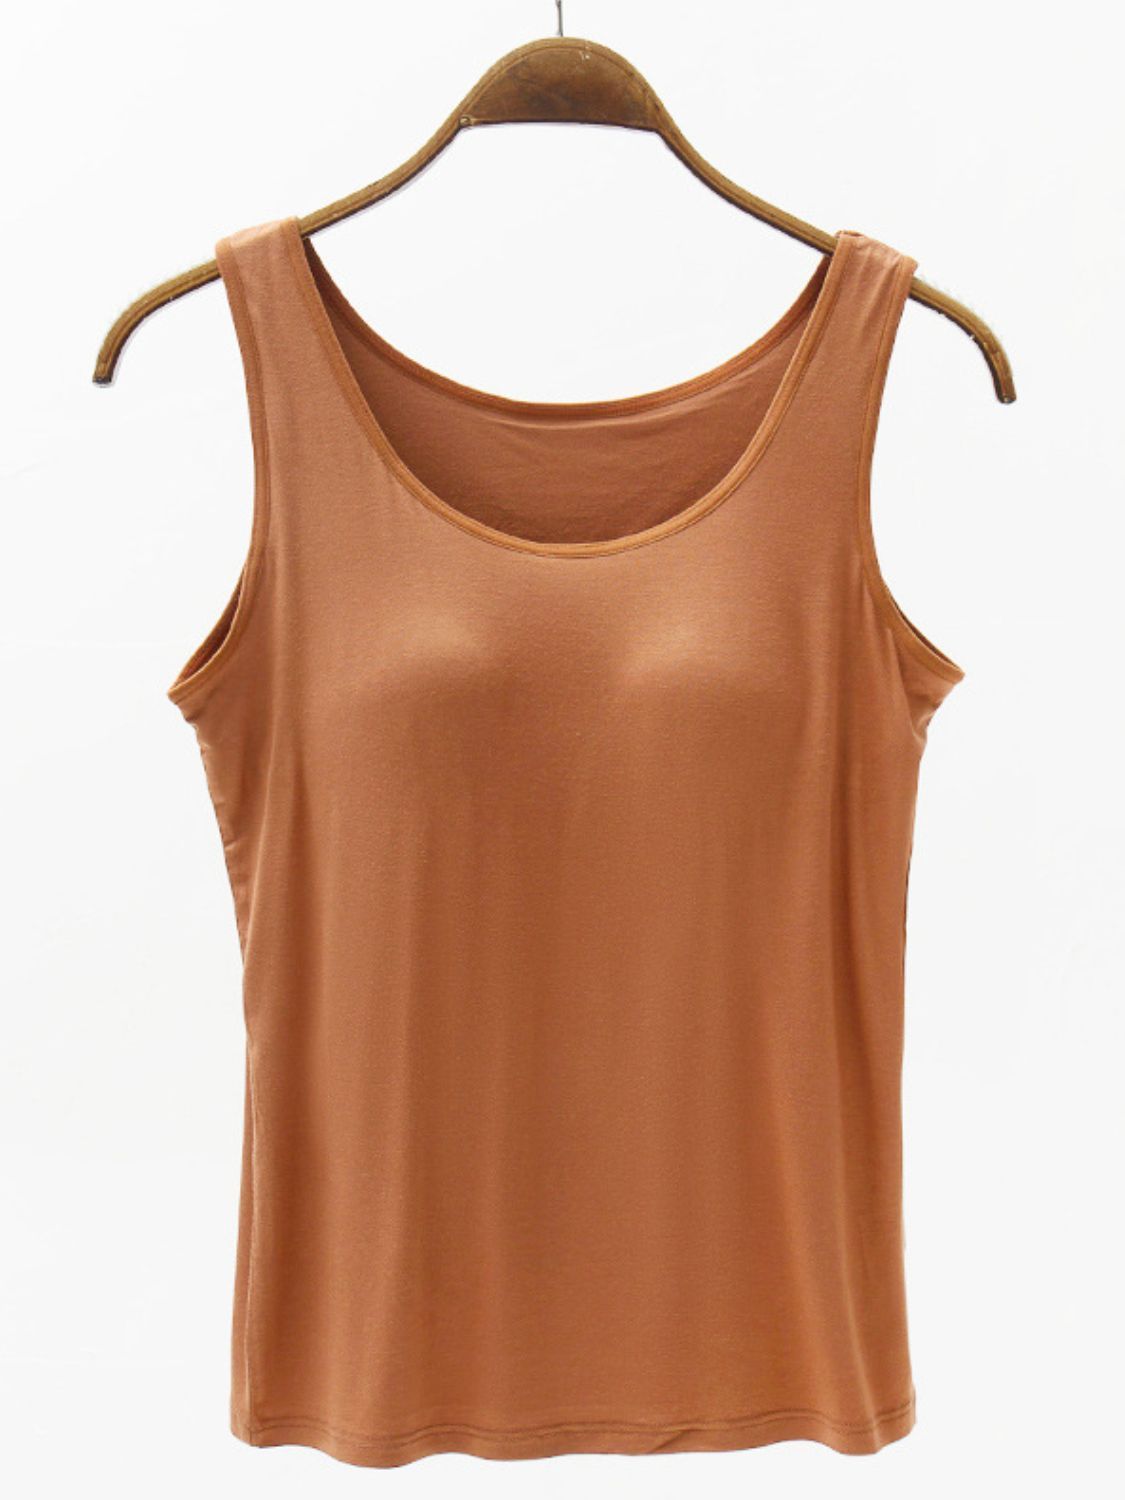 Modal Bralette Tank Top with Wide Straps Caramel